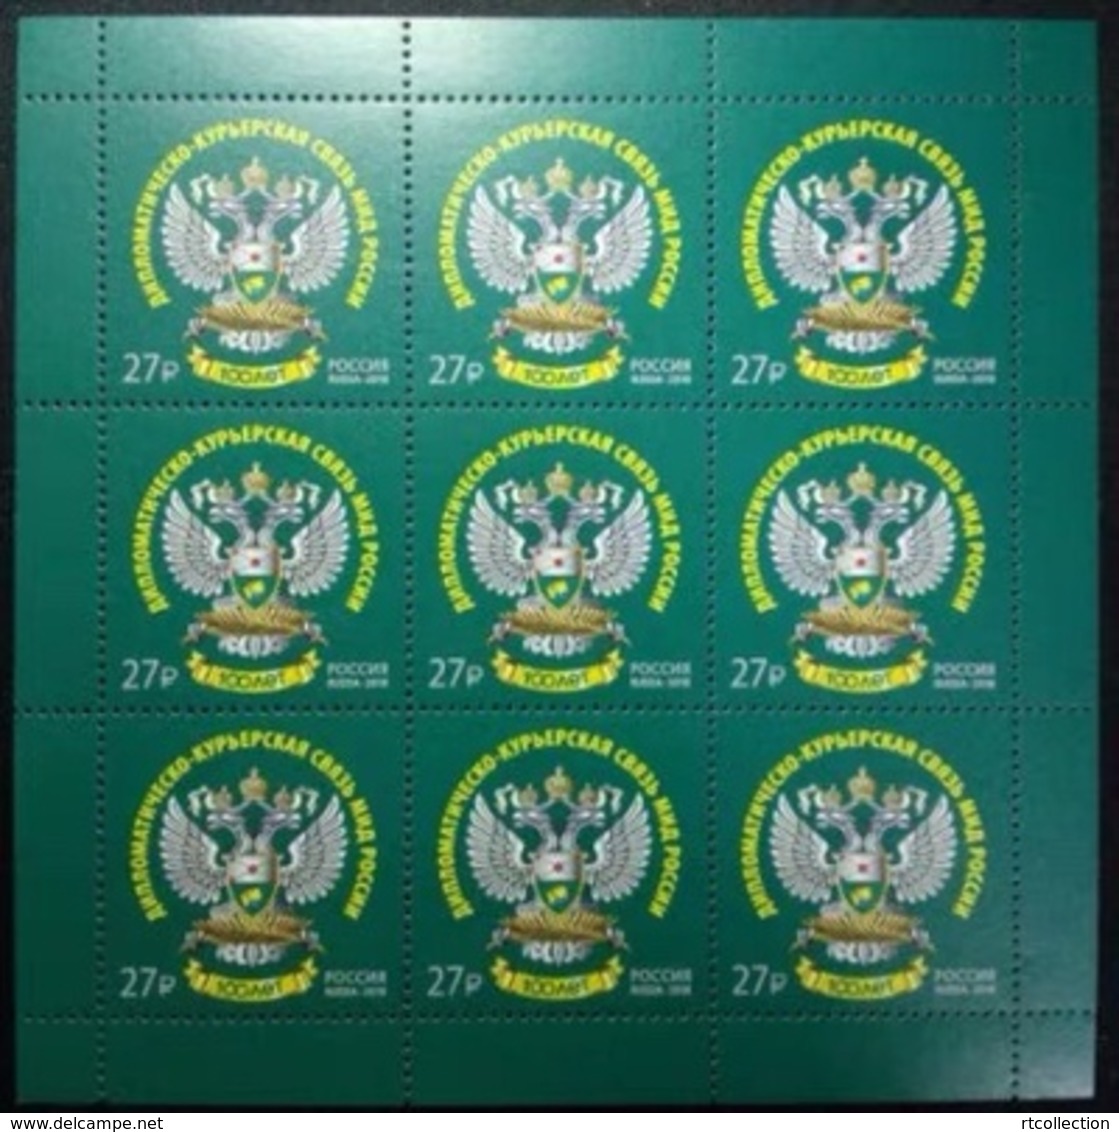 Russia 2018 Sheet Diplomatic And Courier Communication Ministry Of Foreign Affairs Organizations Coat Of Arms Stamps MNH - Stamps